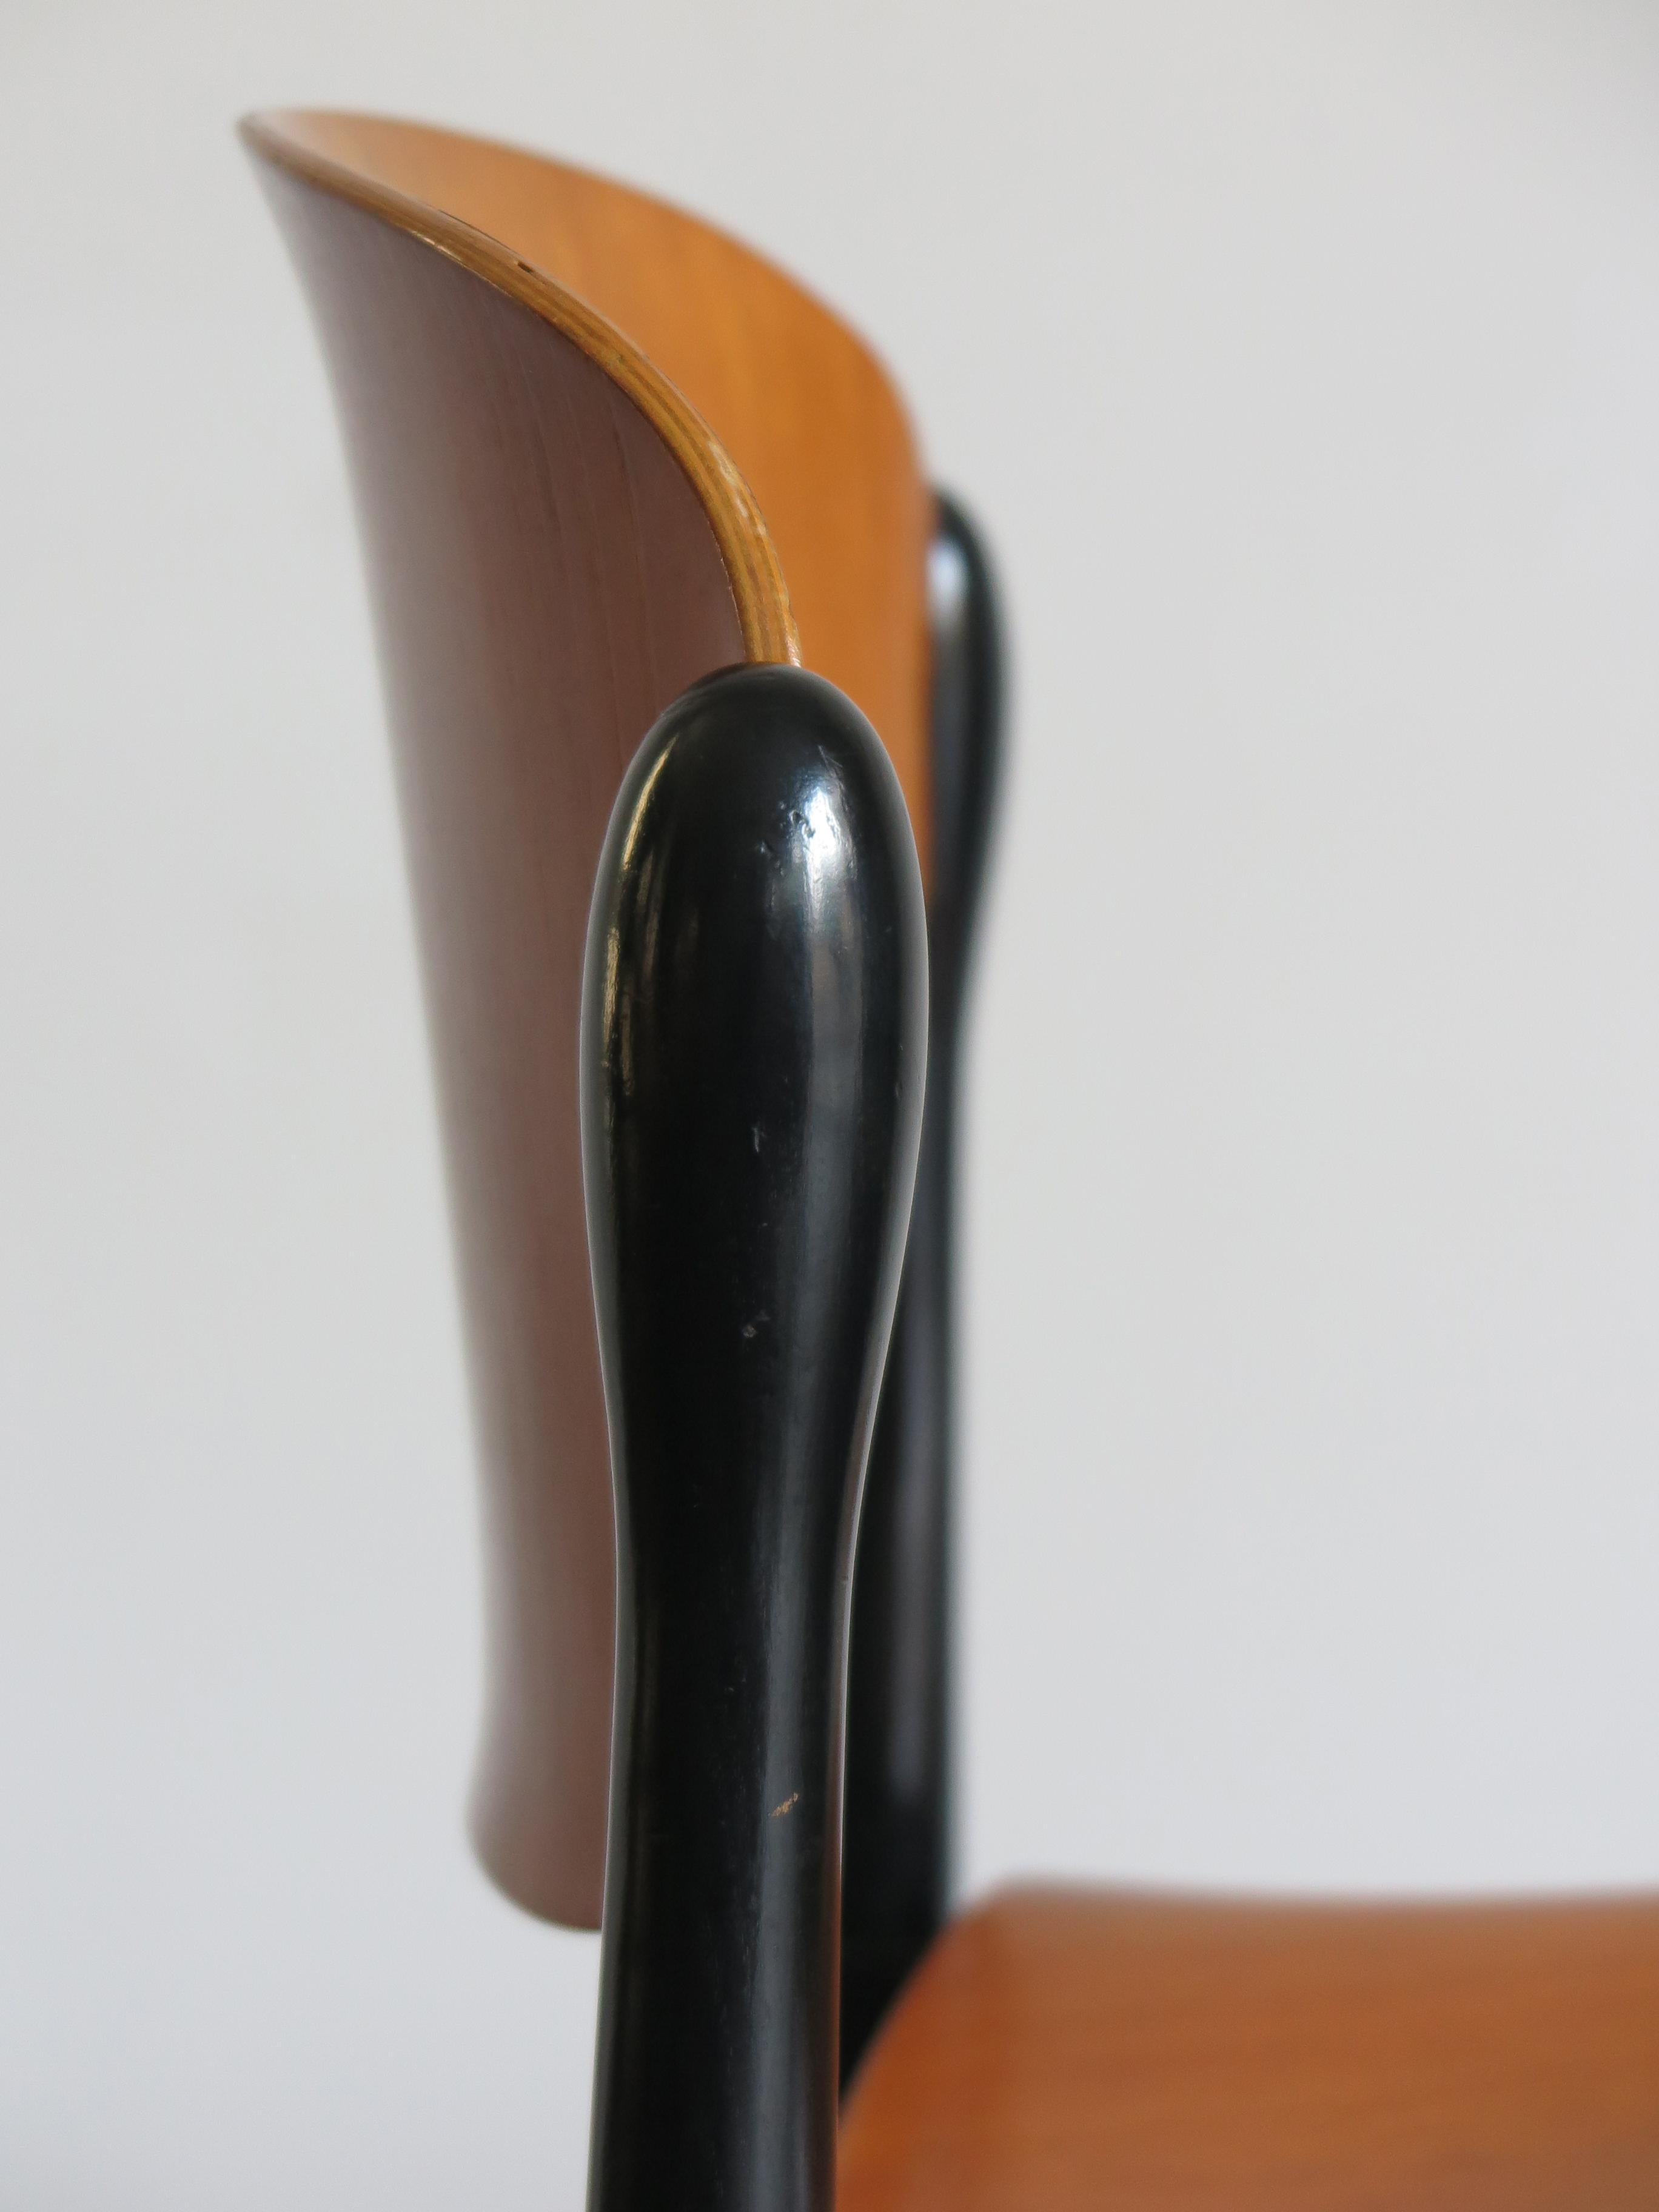 Eugenio Gerli for Tecno Italian Curved Wood Dining Chairs Model “S832”, 1962 5